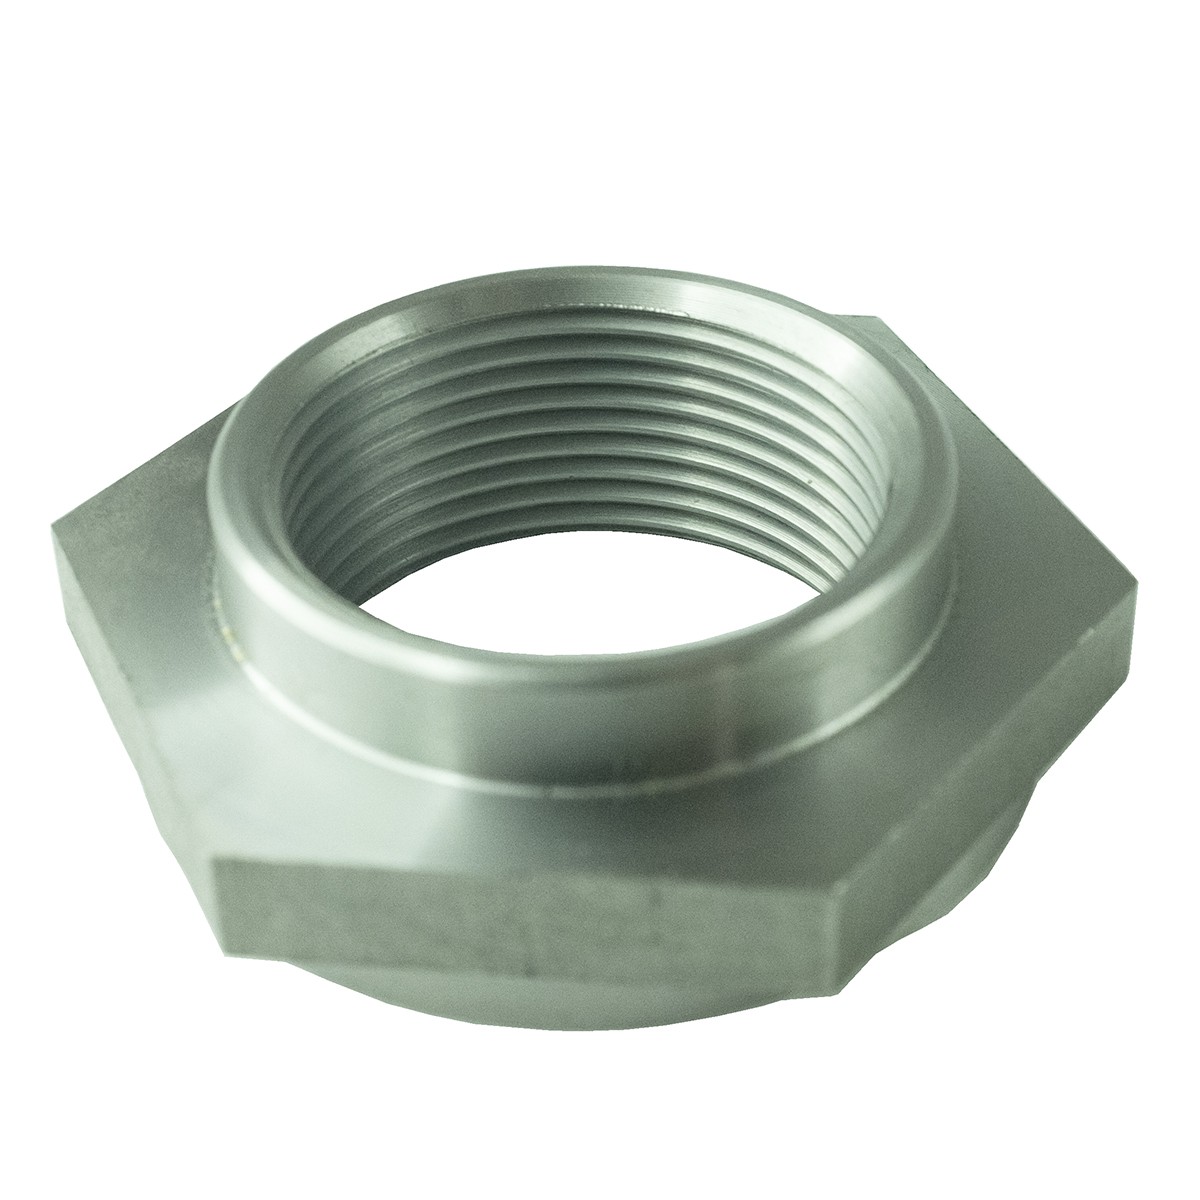 HEX Nut / TRG970 / Ls Tractor 40009935